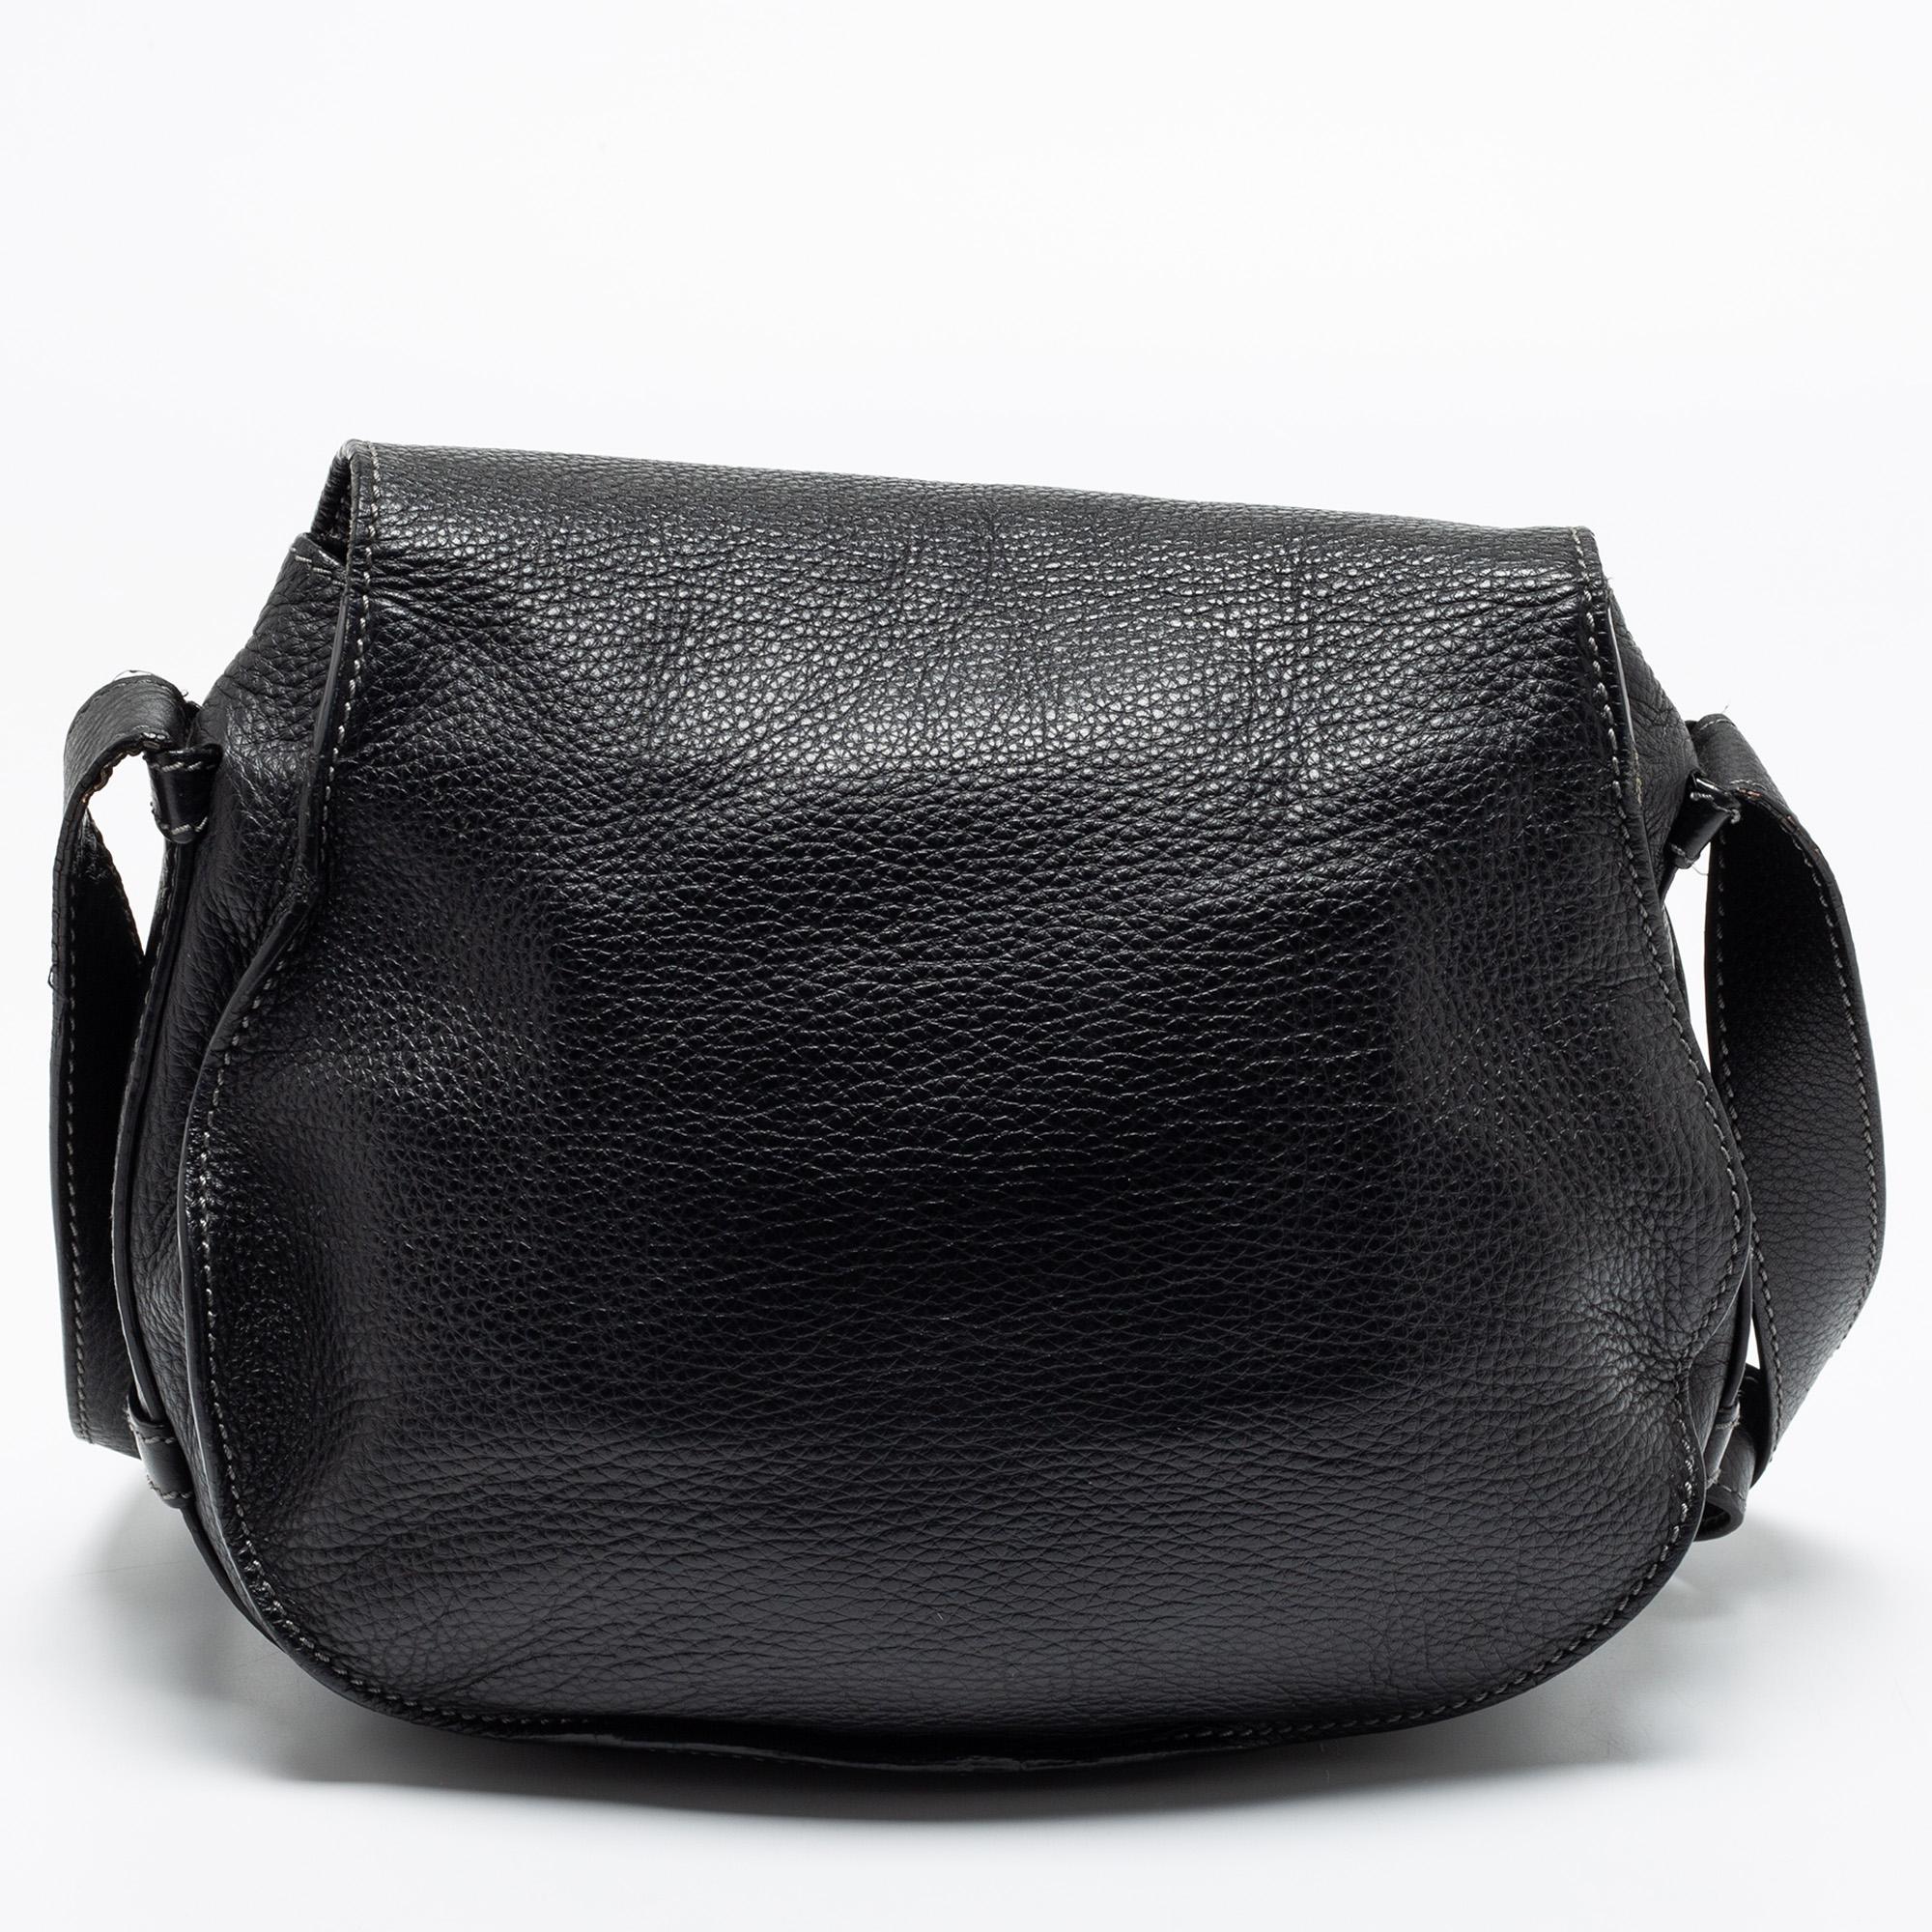 A timeless design that will last you season after season, the Marcie bag from Chloé is a wardrobe essential. The cross-body bag features neat stitching details on the flap in a distinctive shape. Crafted from black leather to a functional